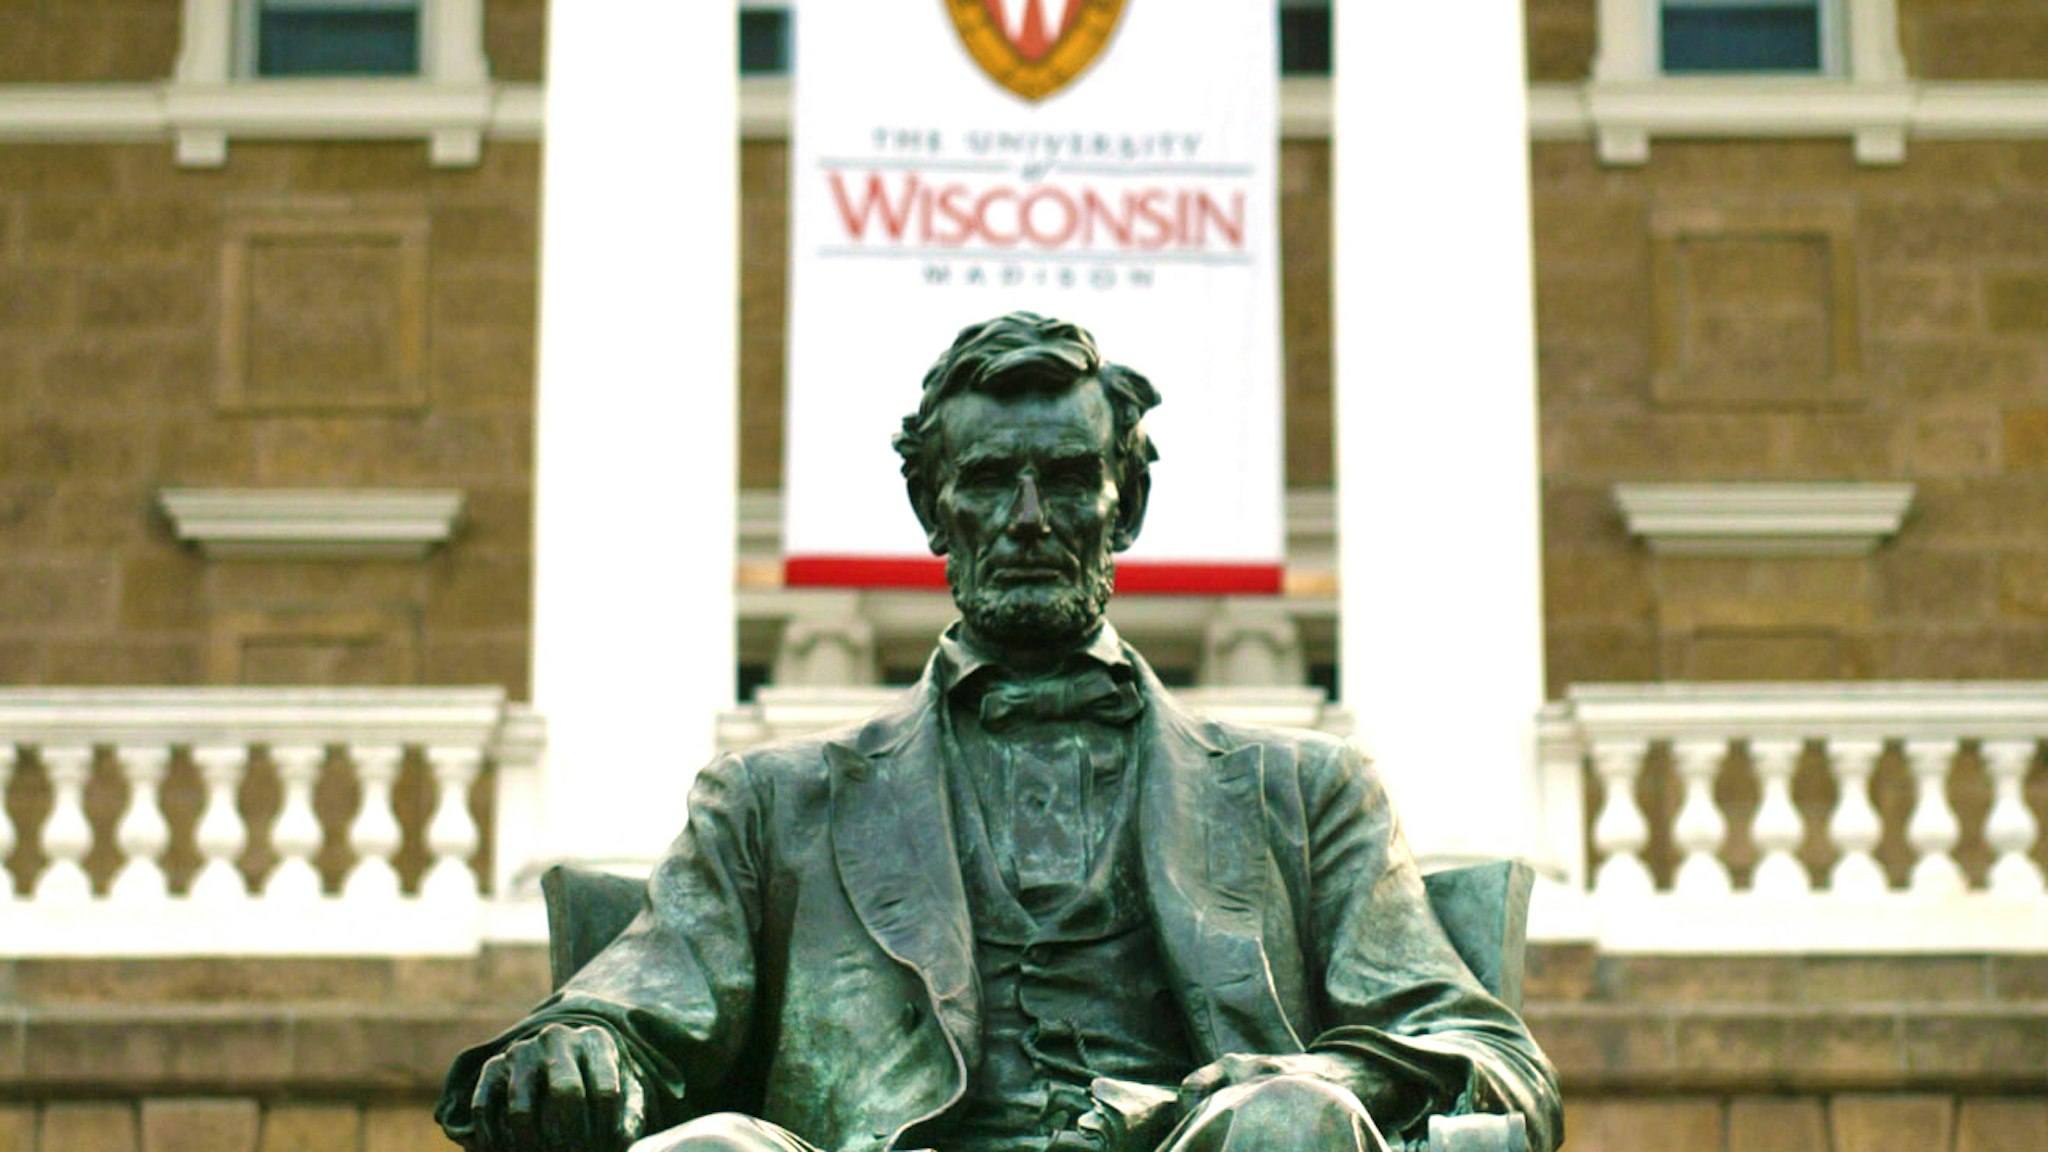 UNITED STATES - JULY 30: A statue of Abraham Lincoln sits in front of Bascom Hall, the University of Wisconsin's Administration building in Madison, Wisconsin on Friday July 30, 2004.